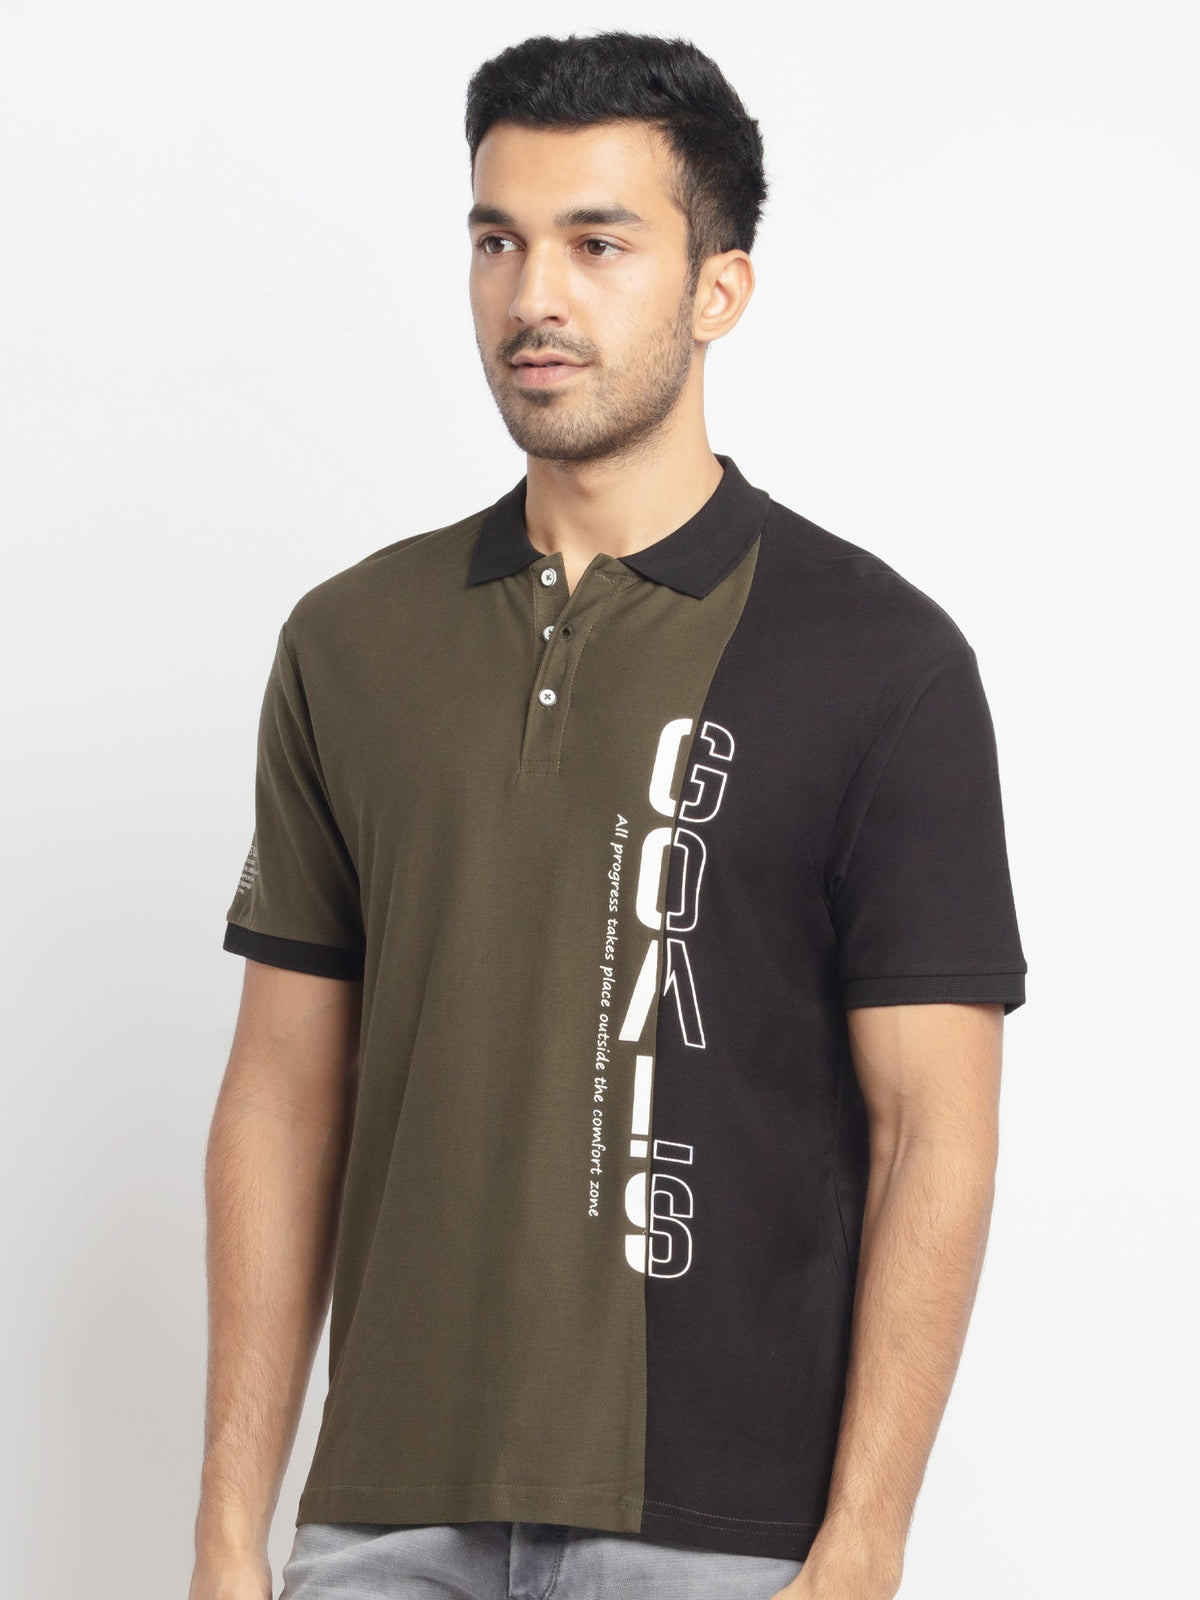 polo t shirts for men